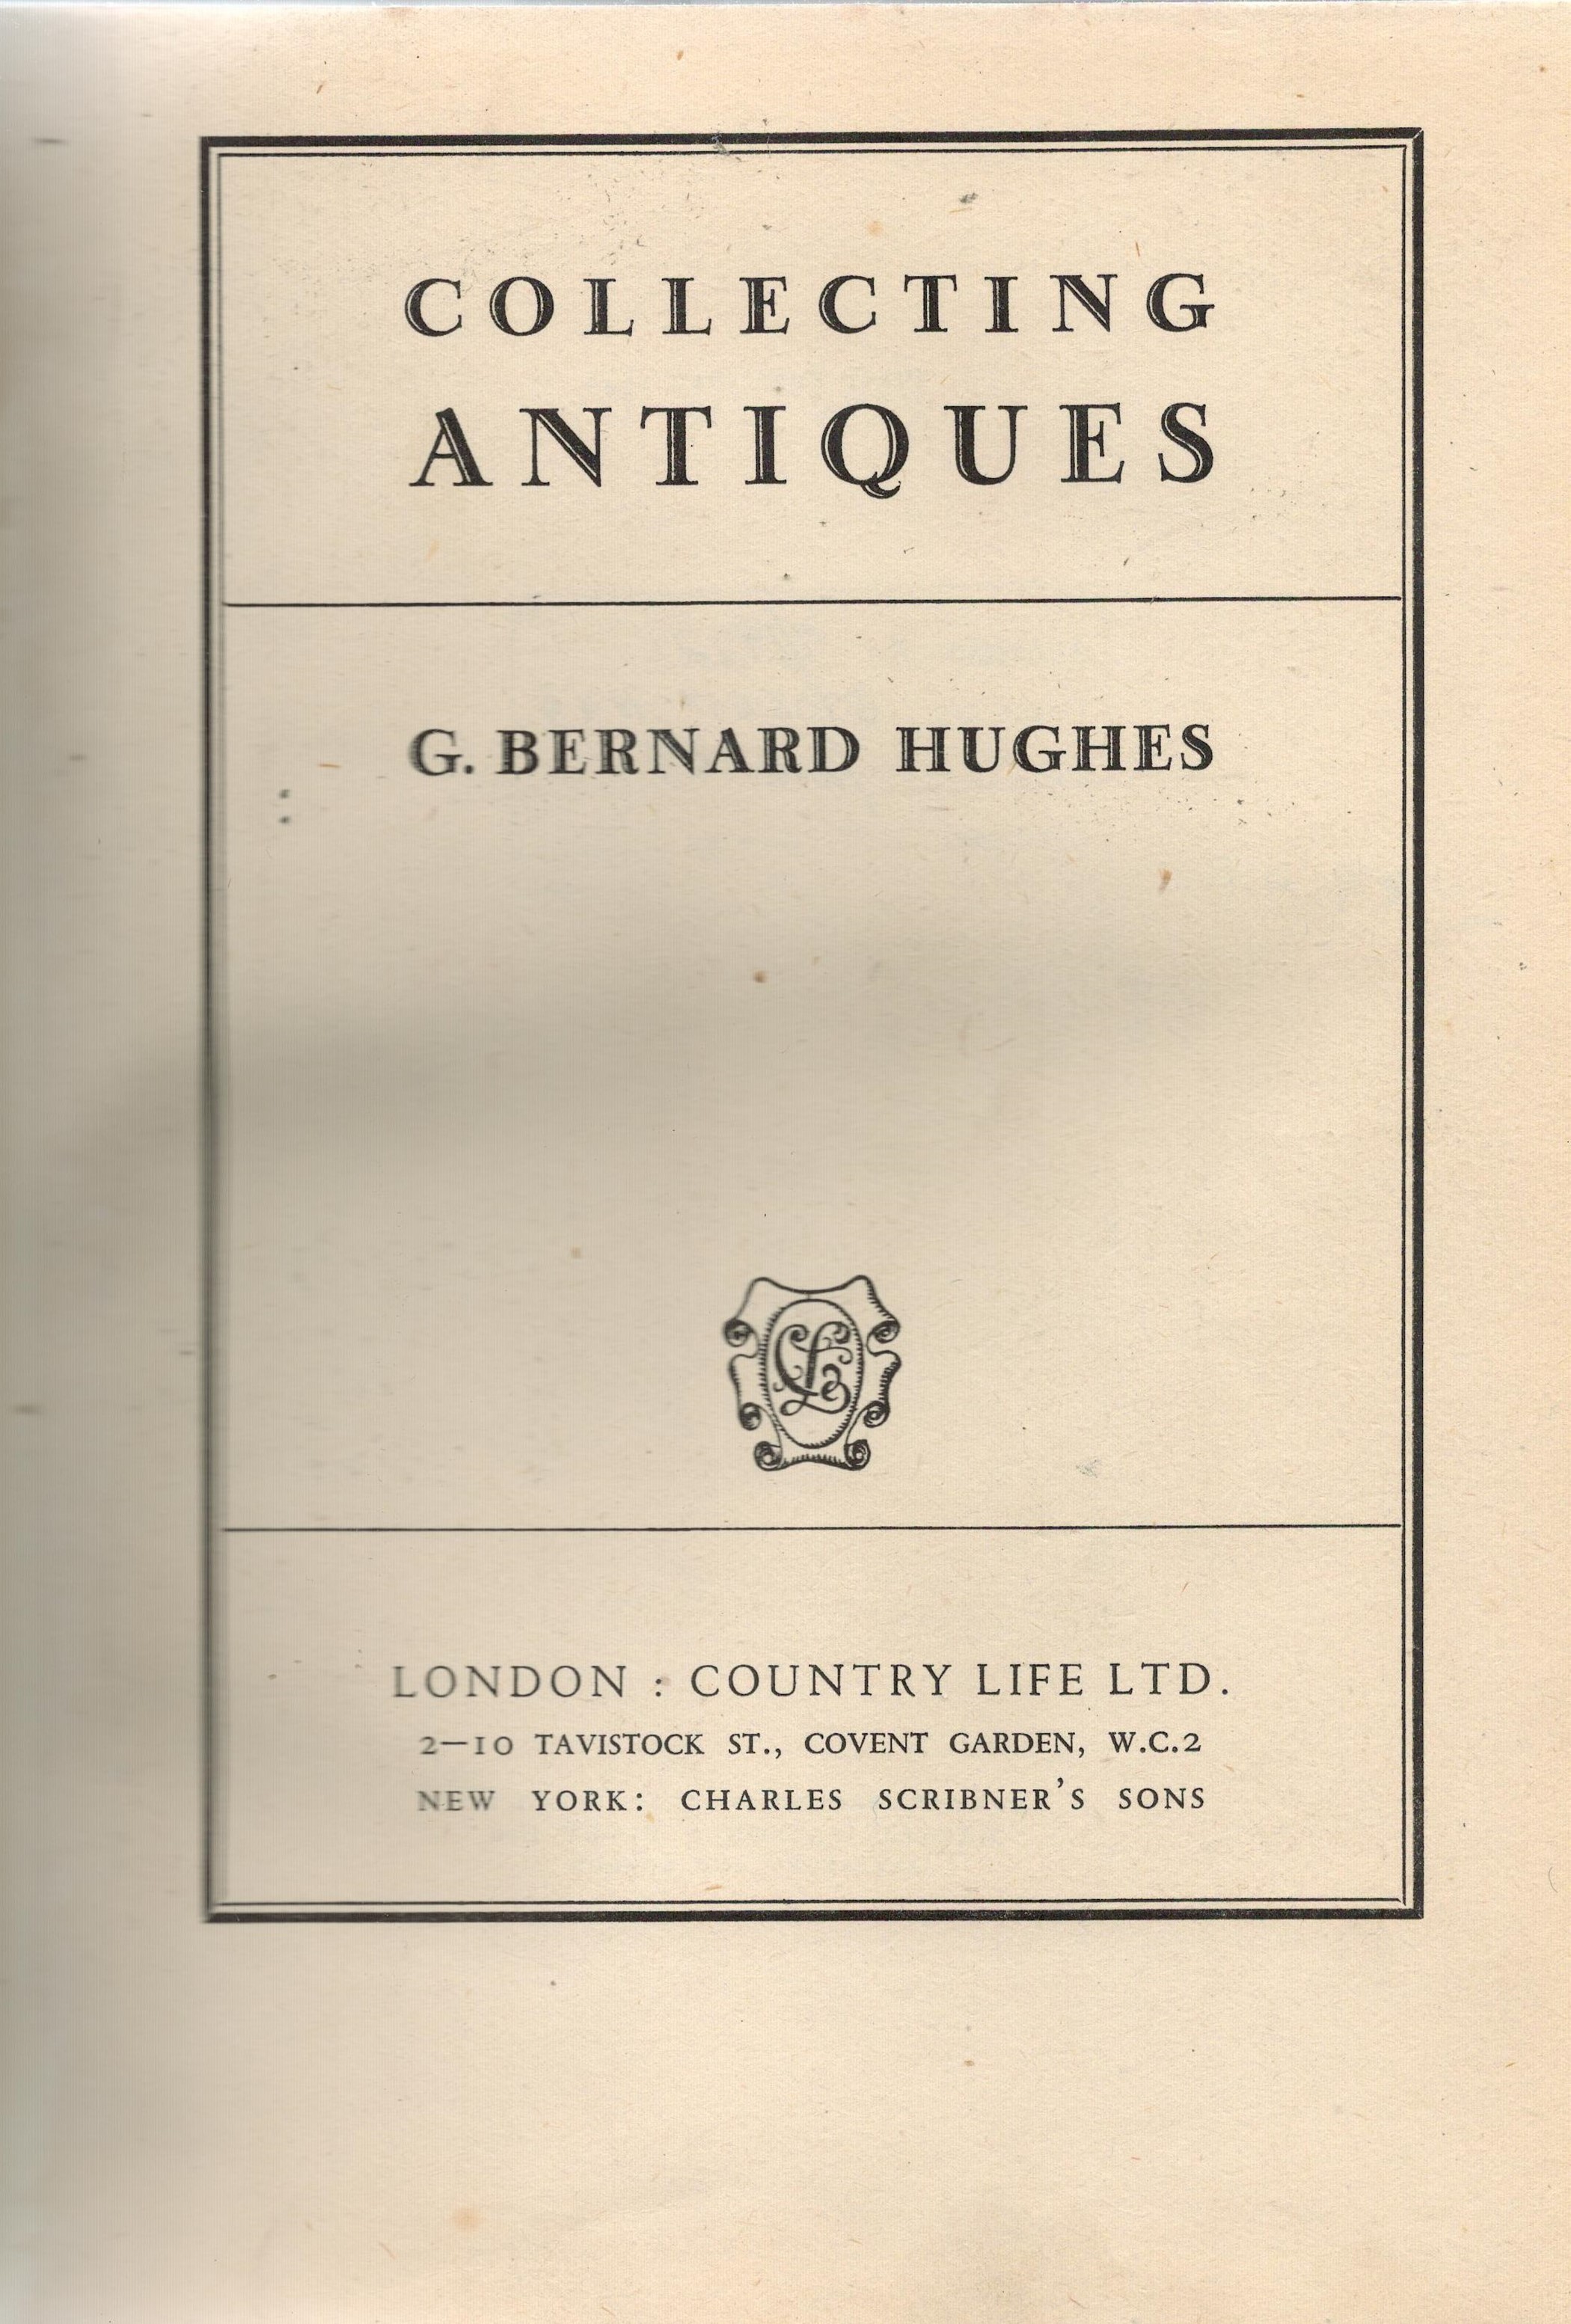 Collecting Antiques by G Bernard Hughes Hardback Book 1949 First Edition published by Country Life